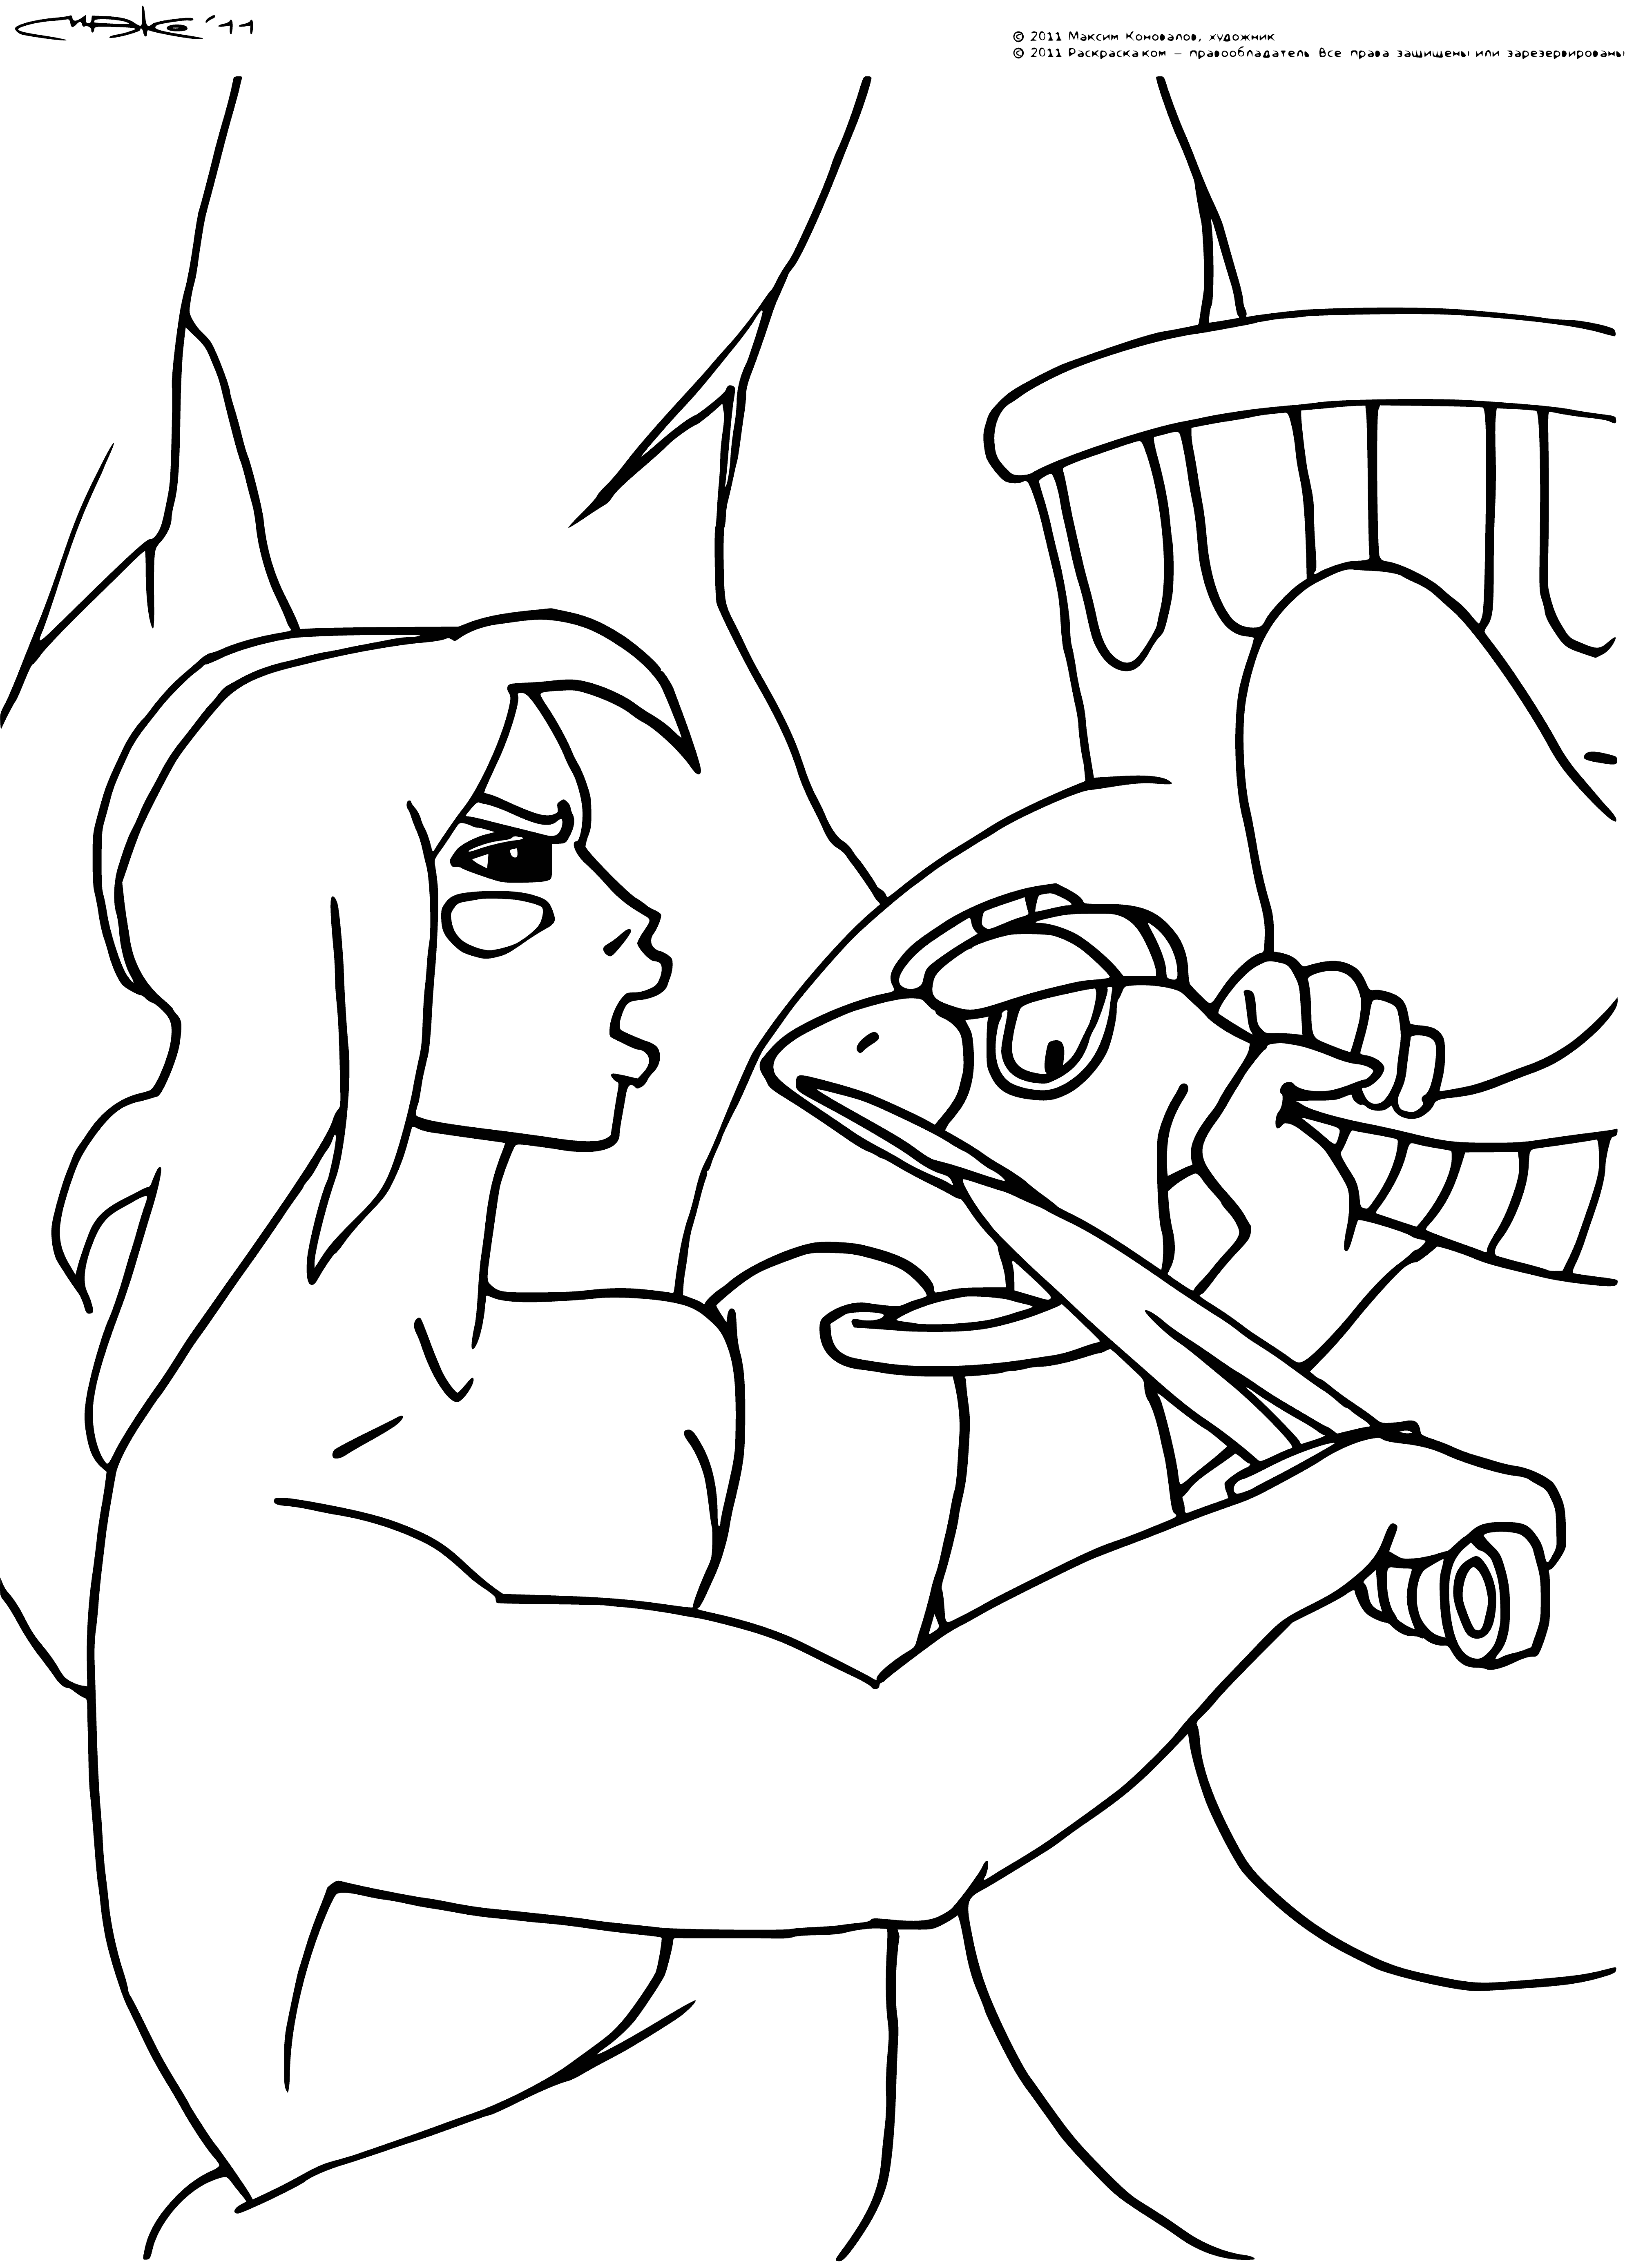 coloring page: Mowgli, a human raised by wolves in the Jungle Book, is featured in the coloring page with his mouth open, revealing lack of poisonous teeth.